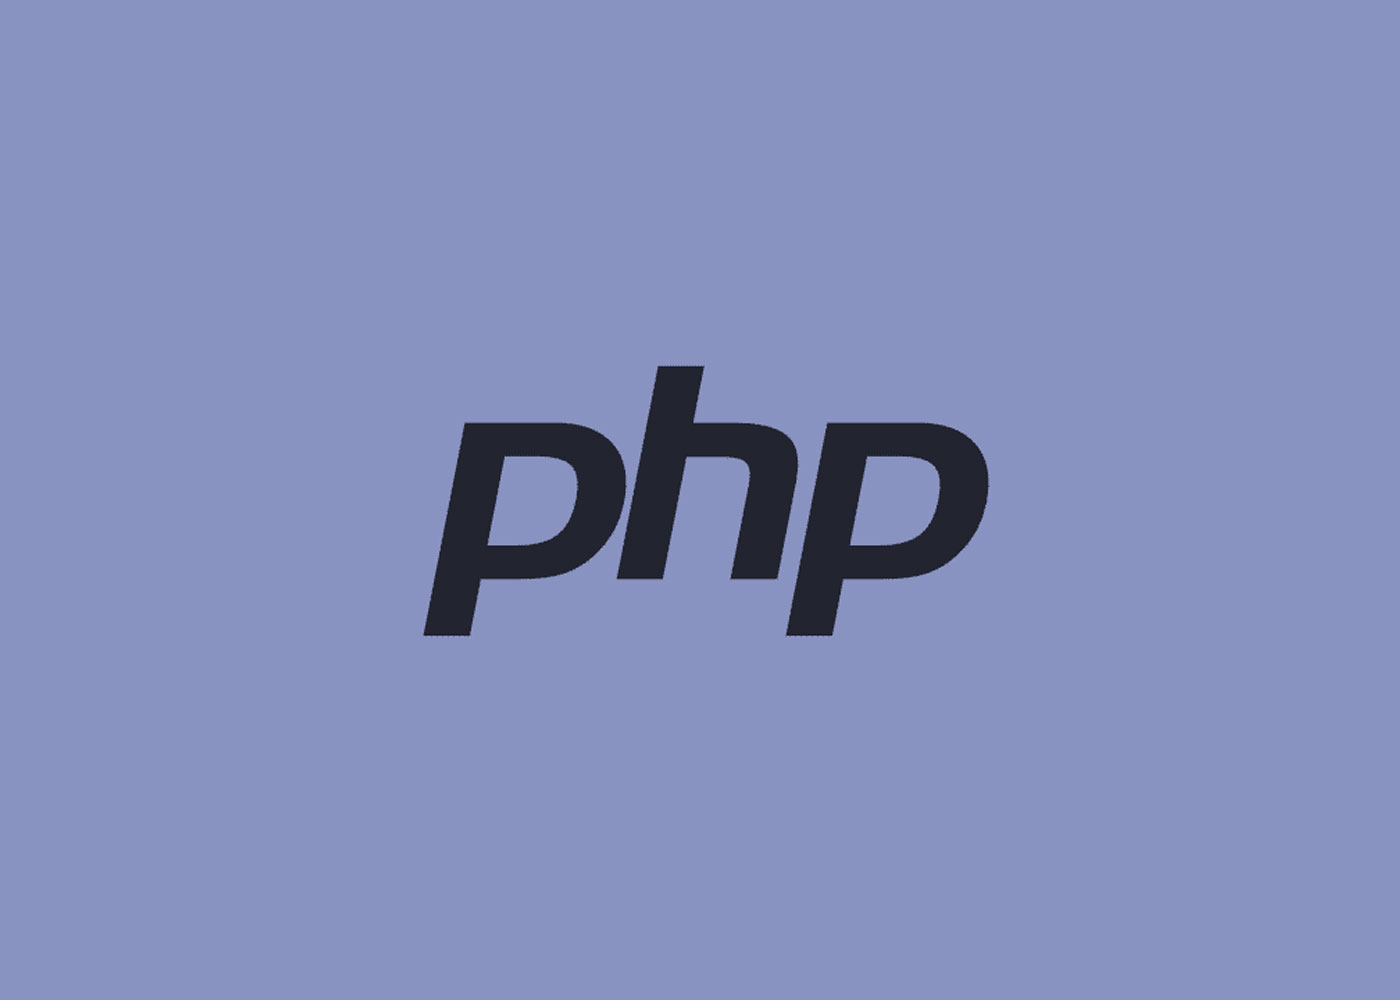 Who Is The Developer Of PHP?